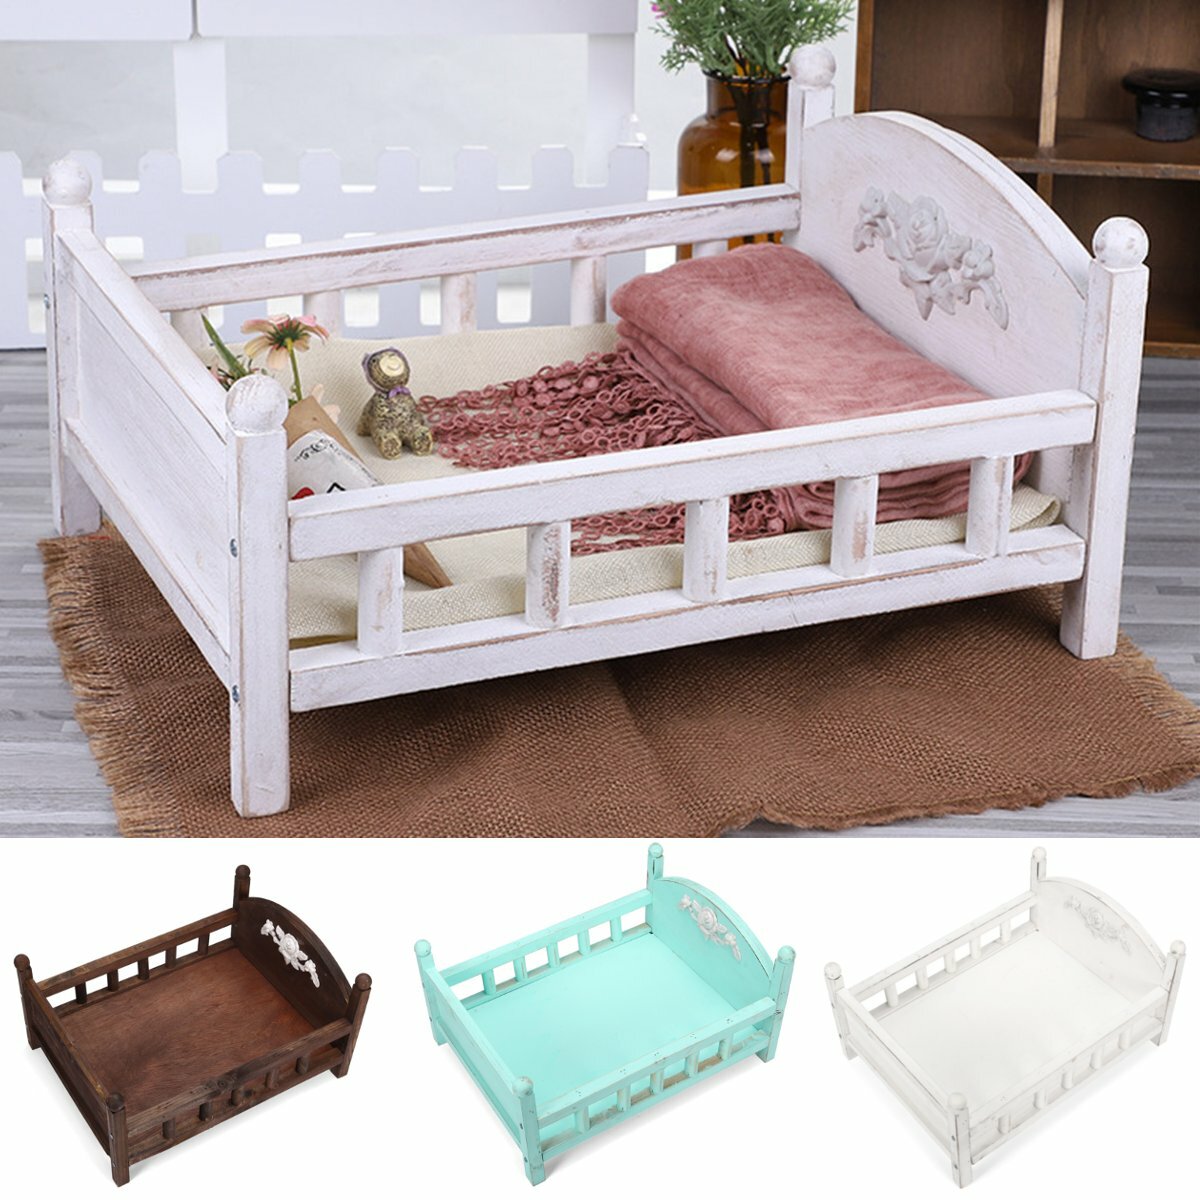 UK Newborn Baby Mini Wooden Bed Detachable Photography Photo Props For Shoot 